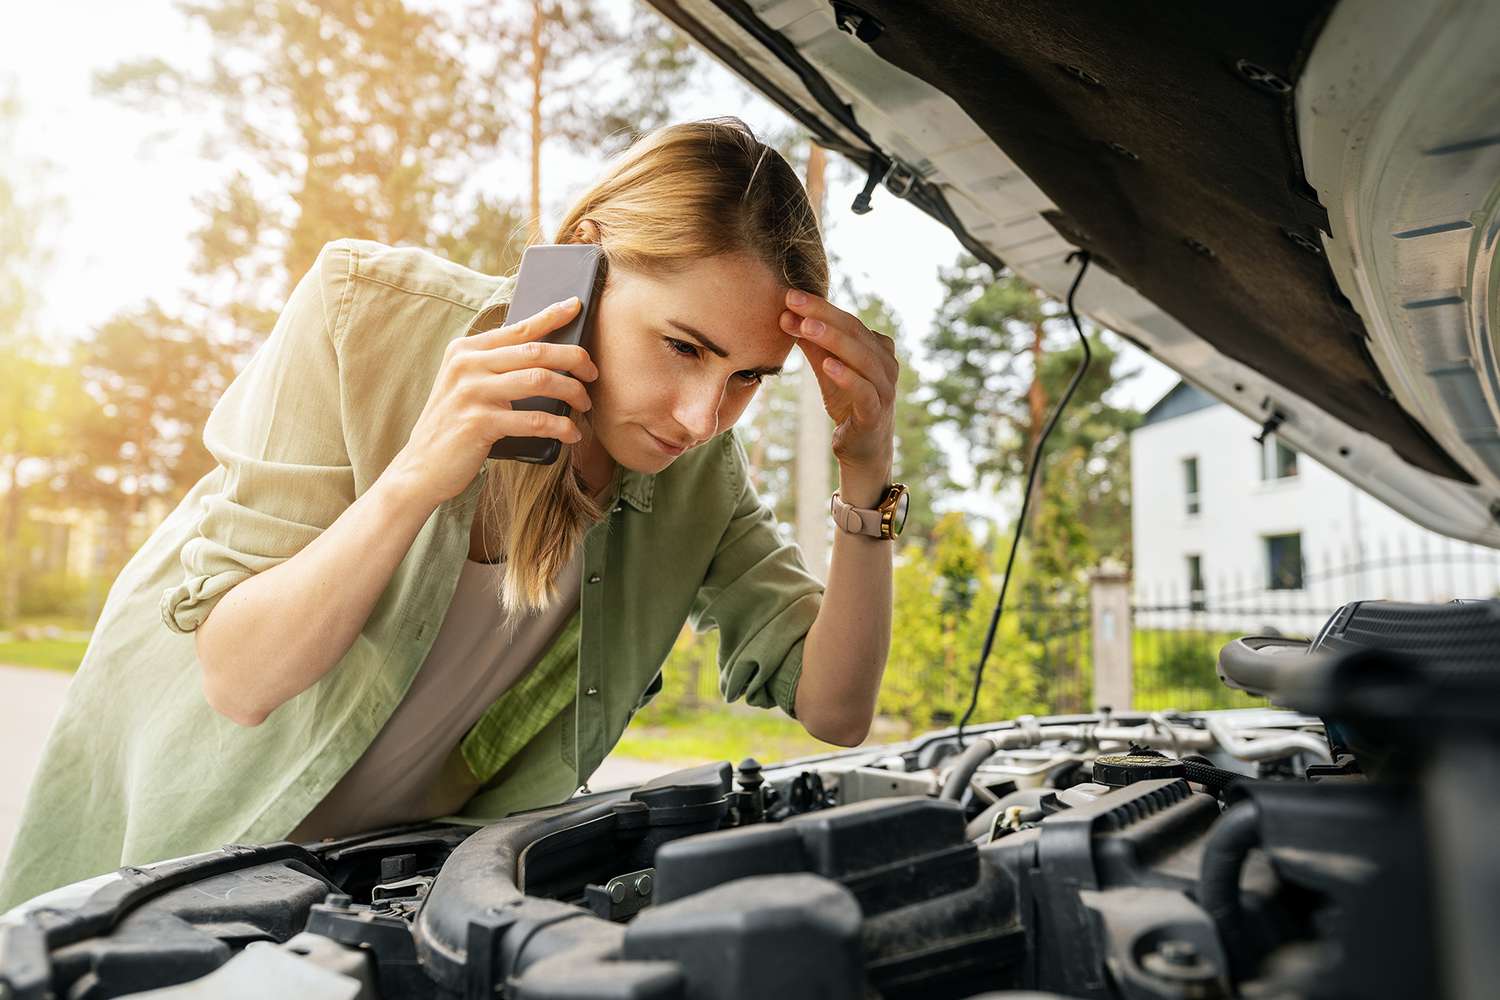 Is It Better to Repair or Replace Your Car?